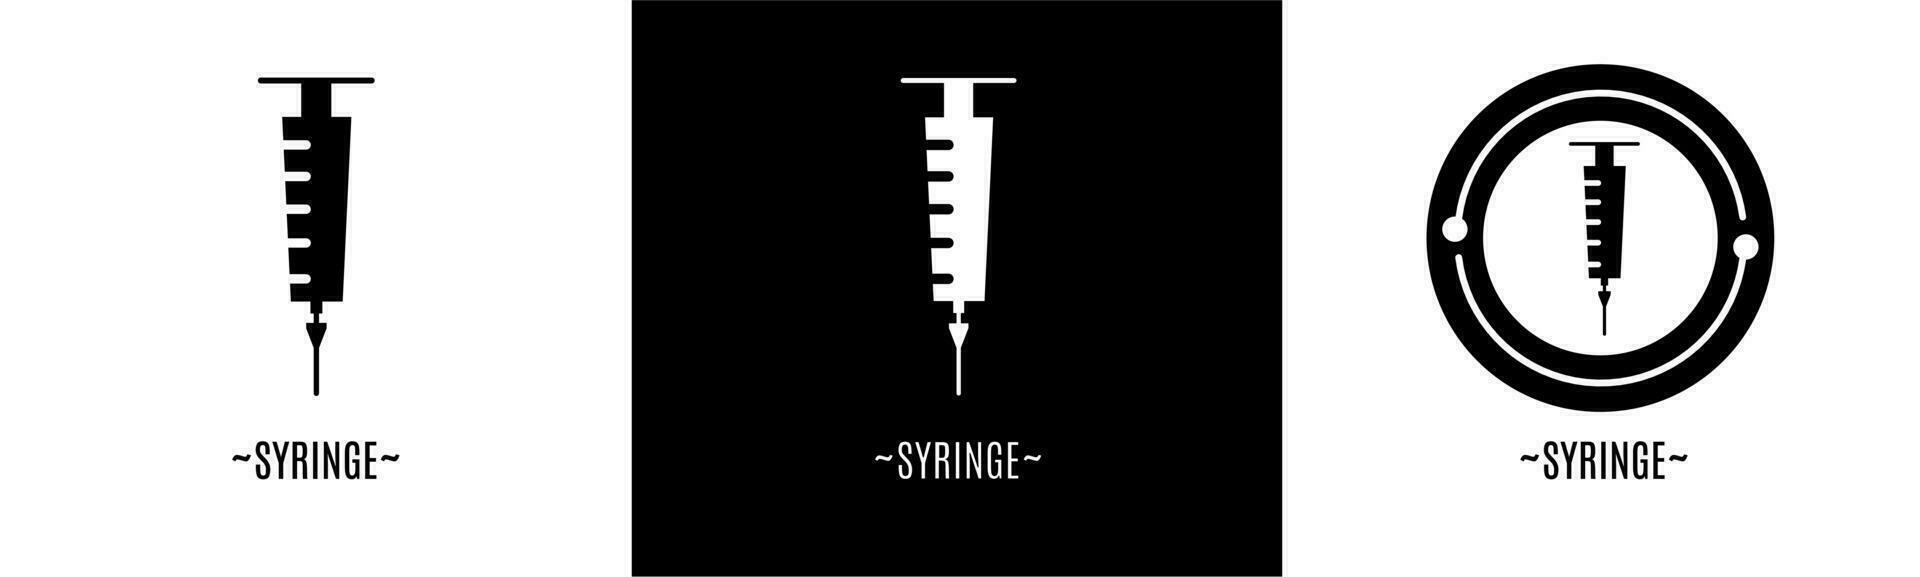 Syringe logo set. Collection of black and white logos. Stock vector. vector